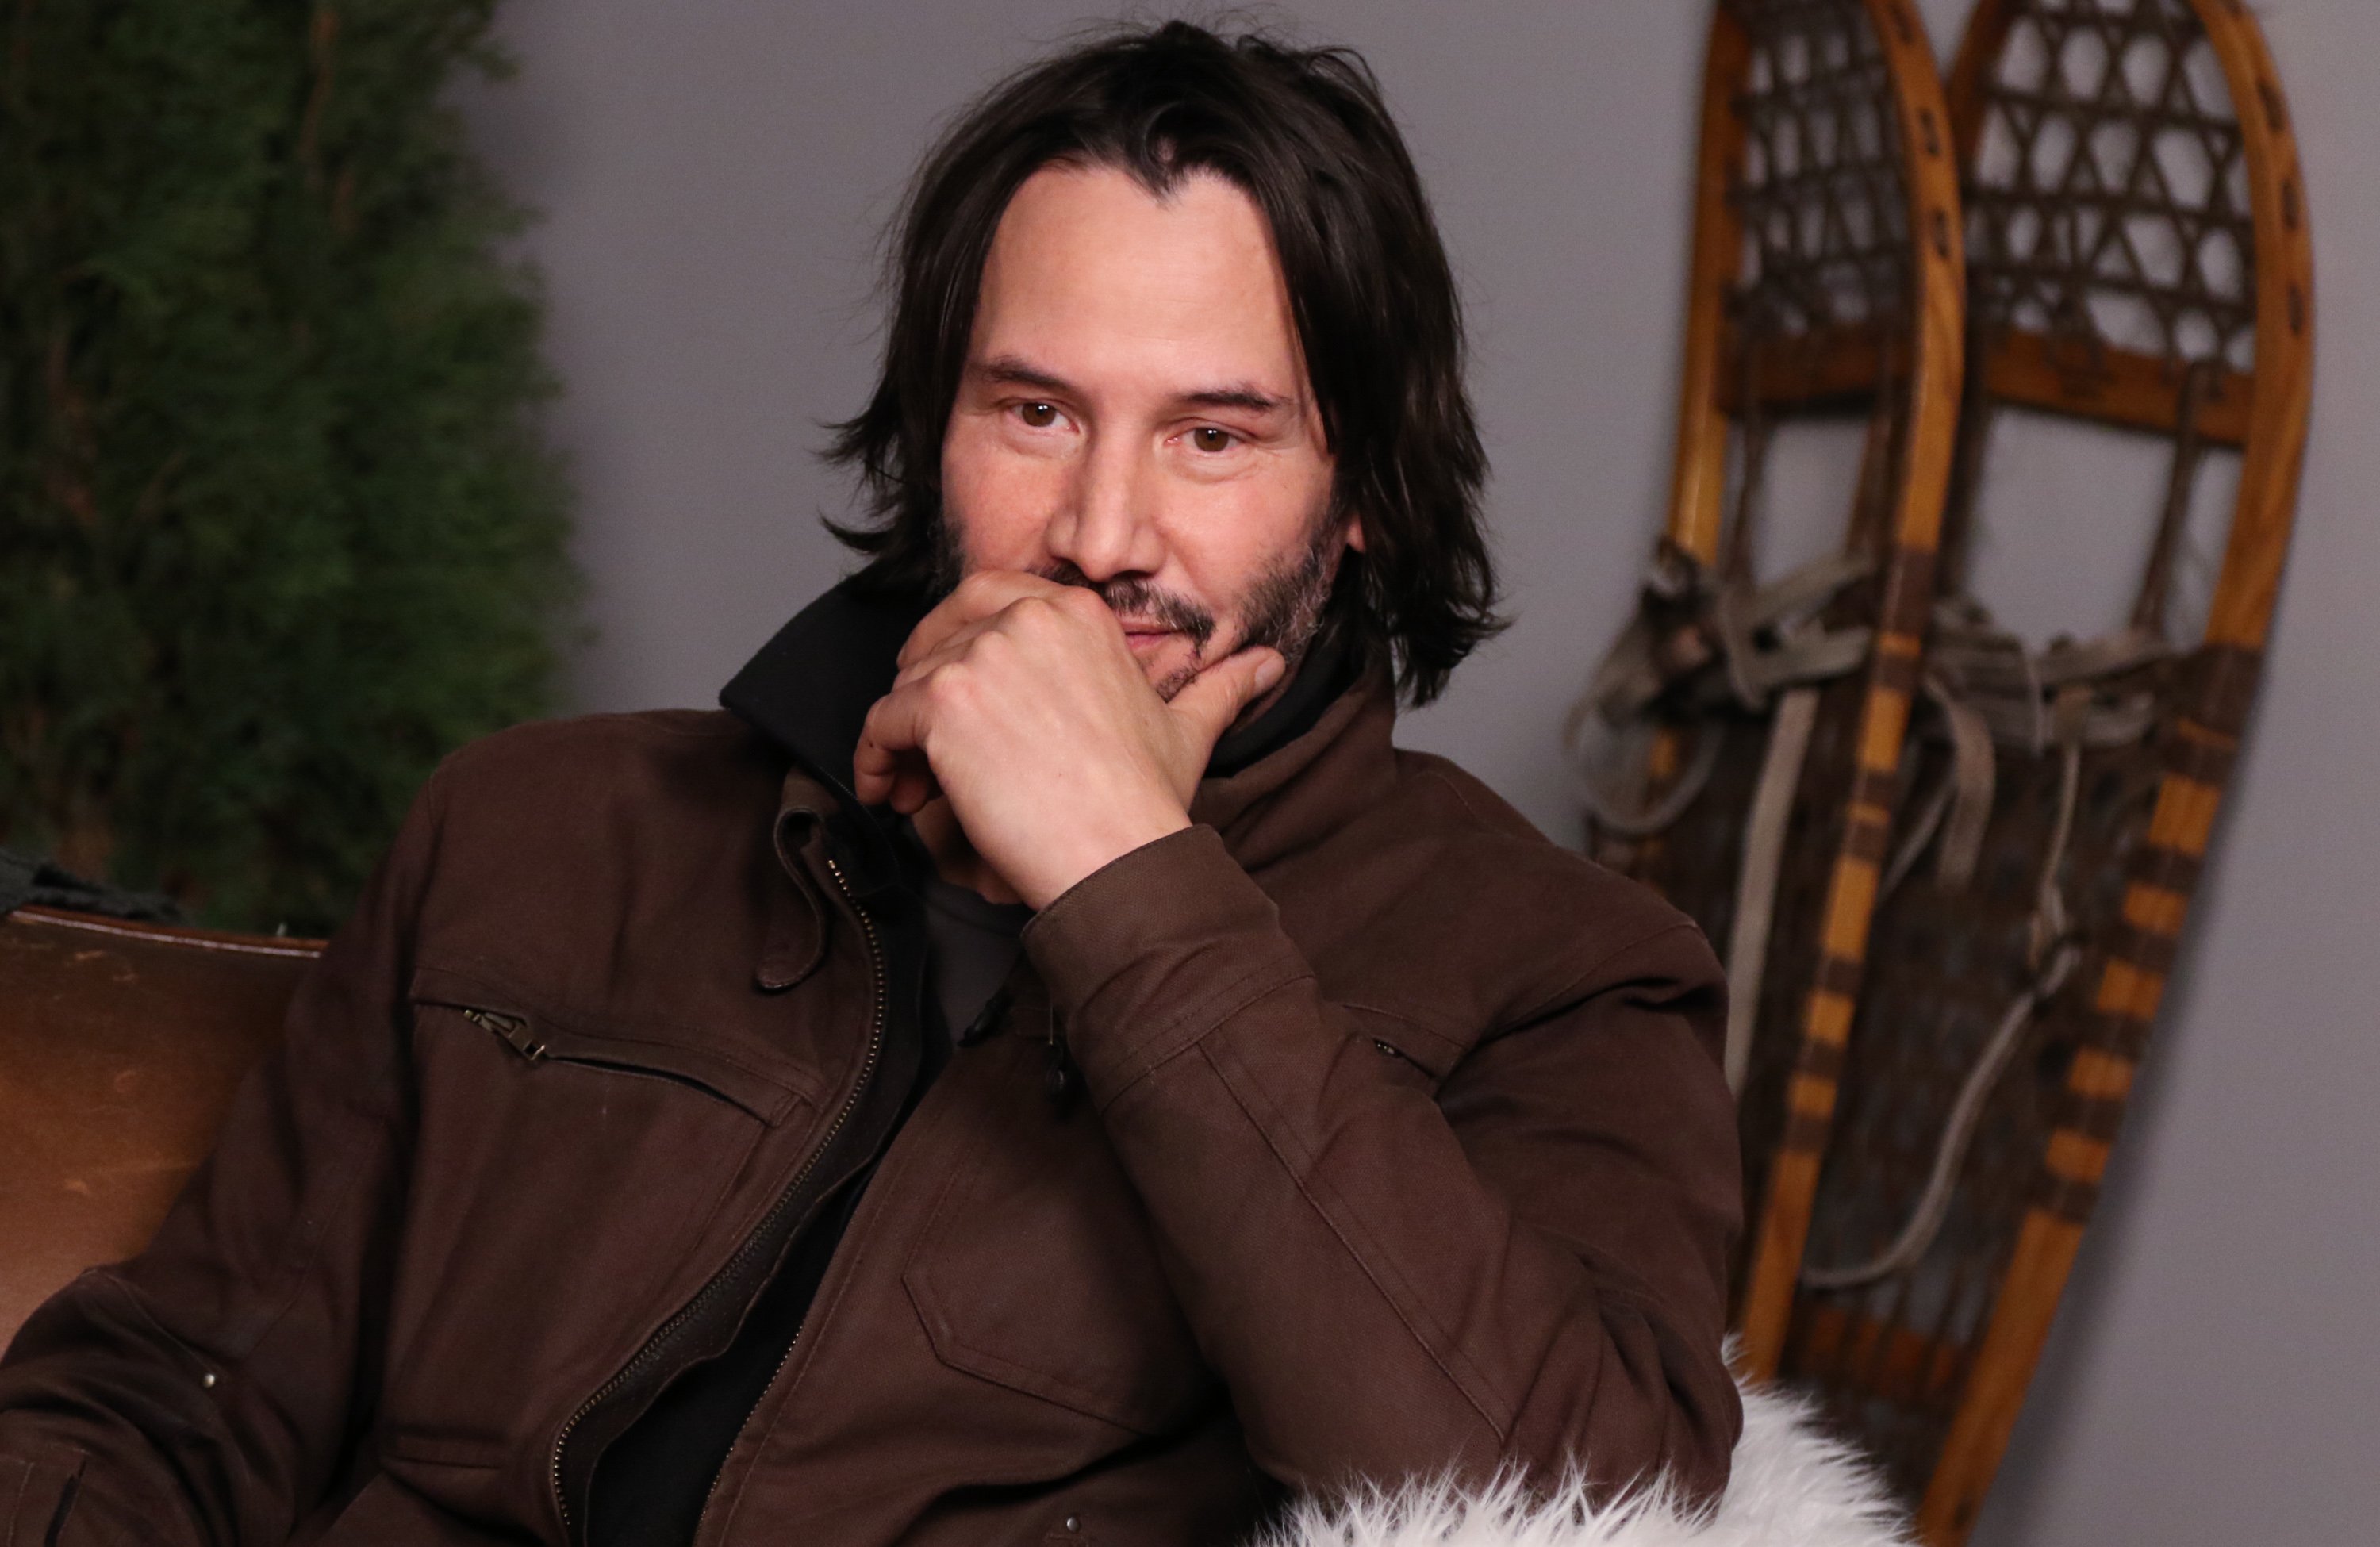 Keanu Reeves drops by The Hollywood Reporter 2017 Sundance Studio At Sky Strada - Day 2 on January 21, 2017 in Park City, Utah. | Source: Getty Images